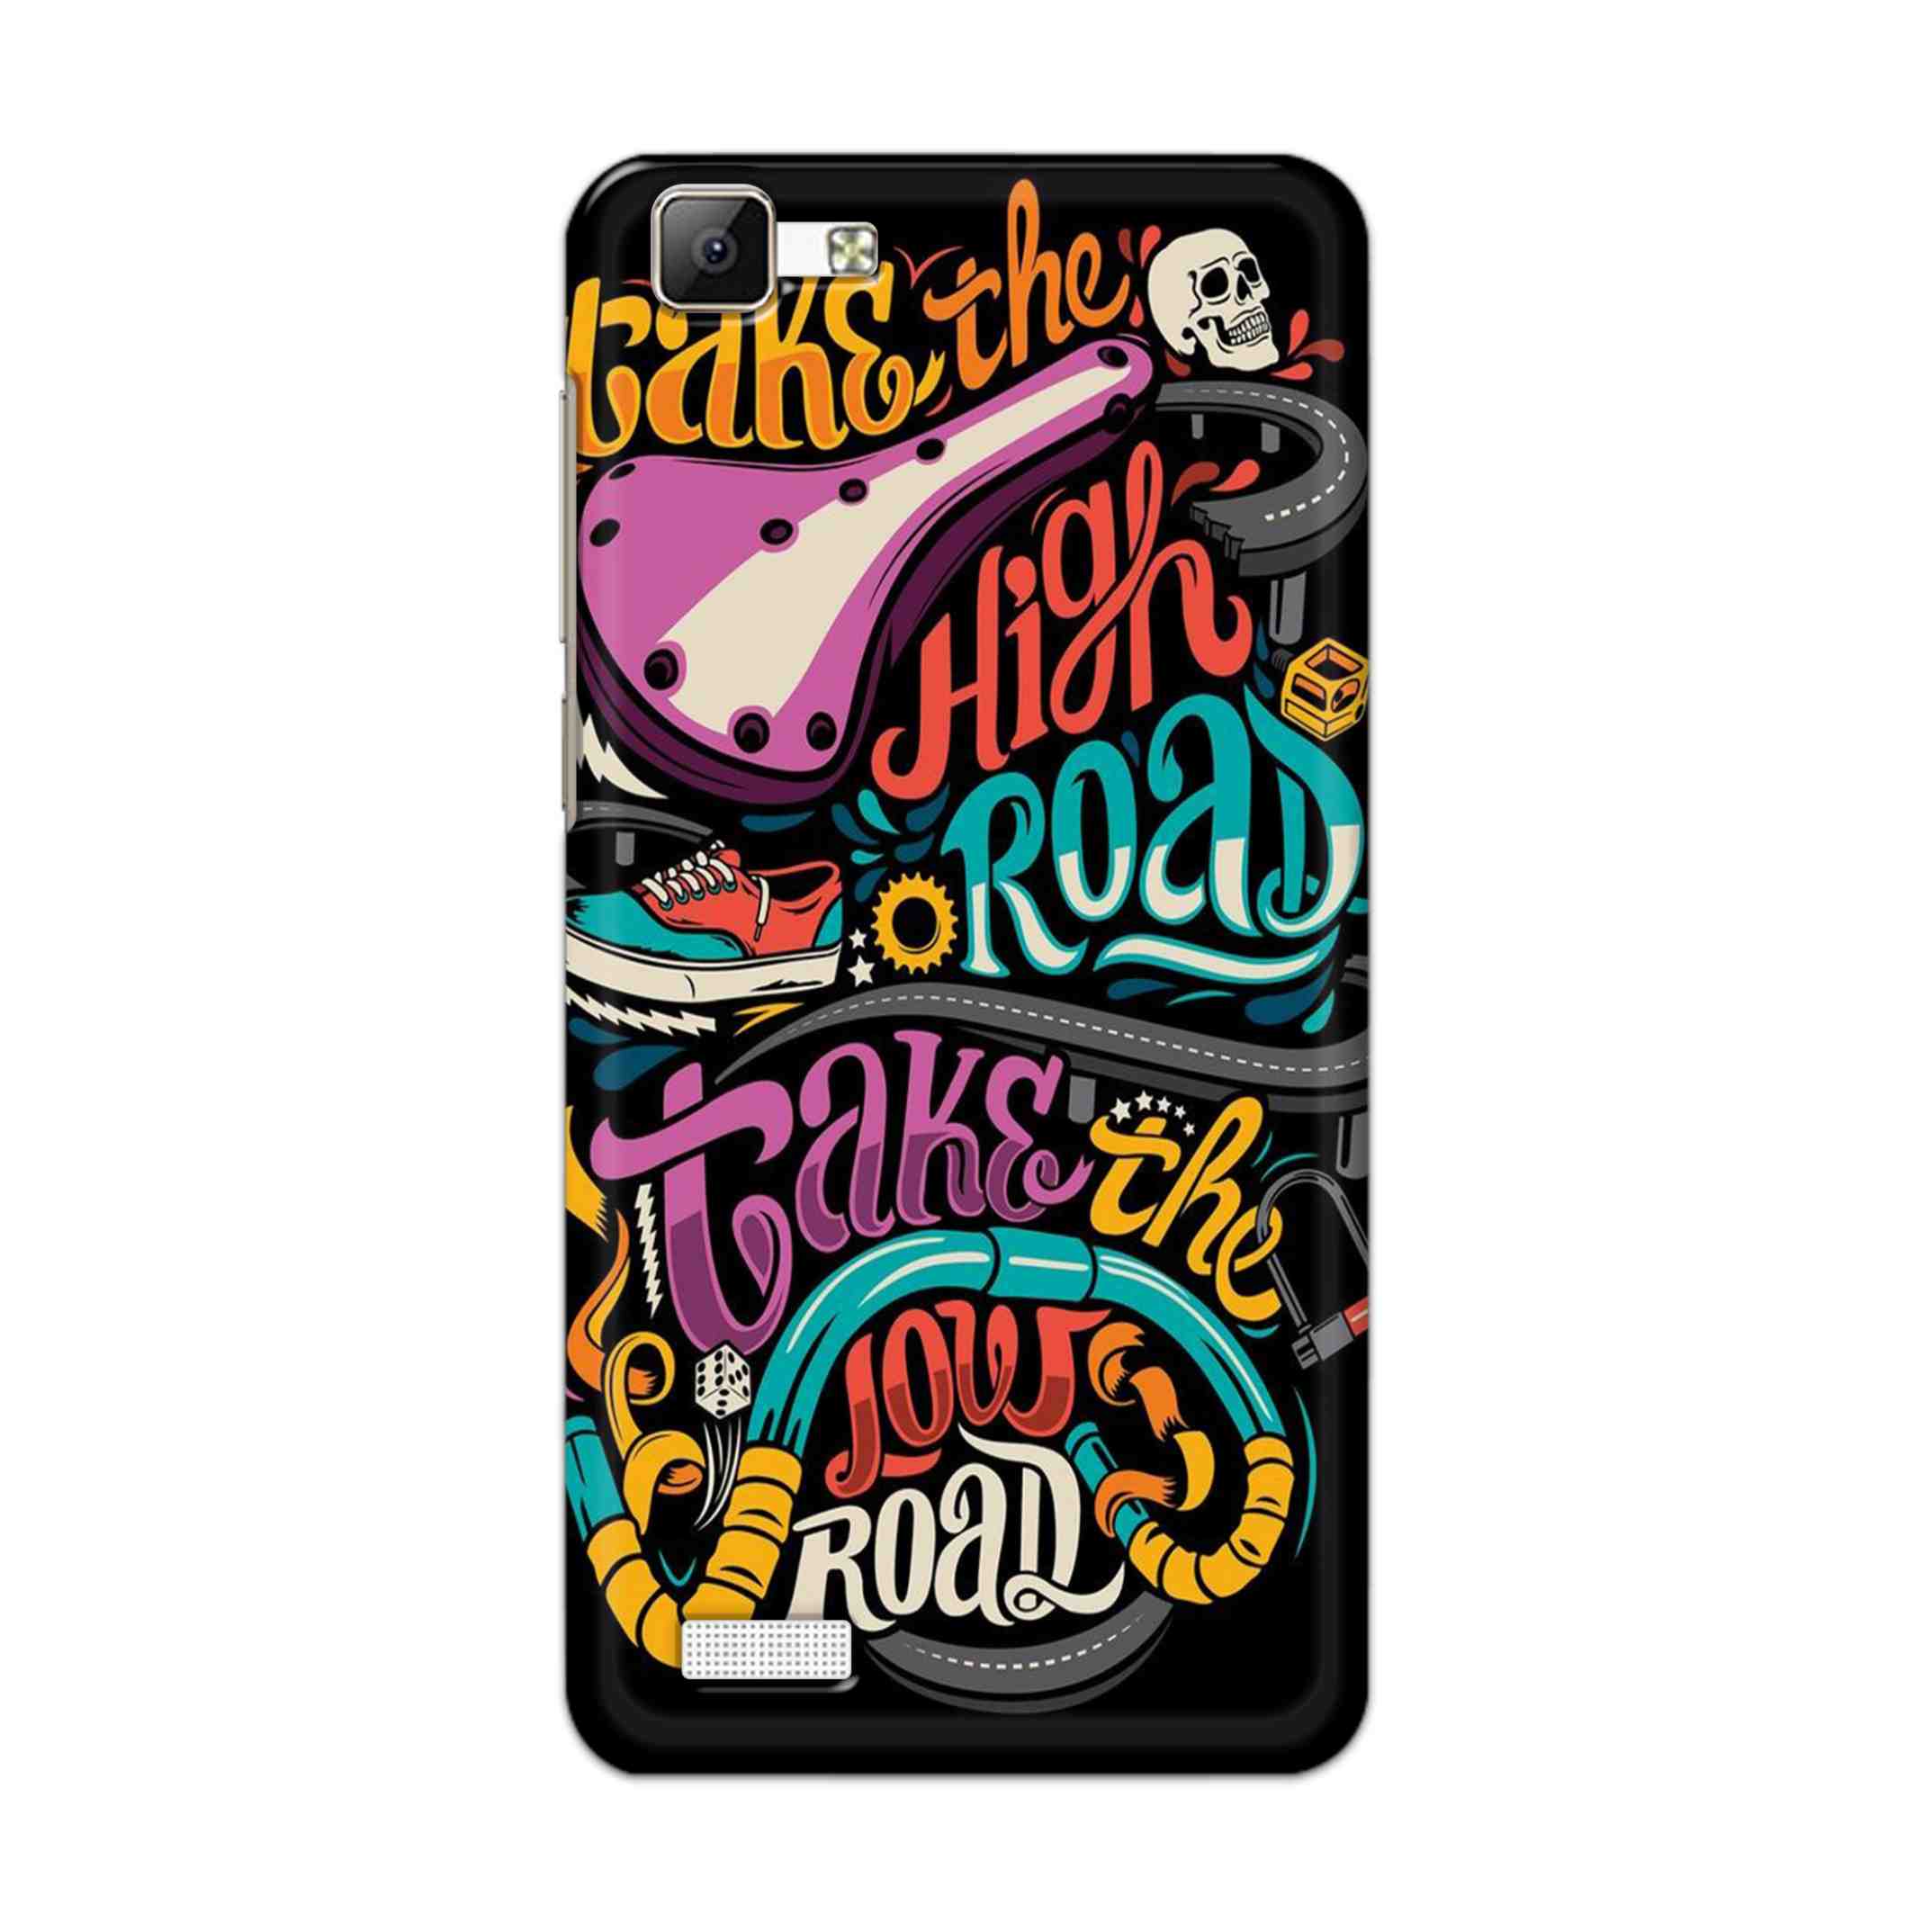 Buy Take The High Road Hard Back Mobile Phone Case Cover For Vivo Y35 Online